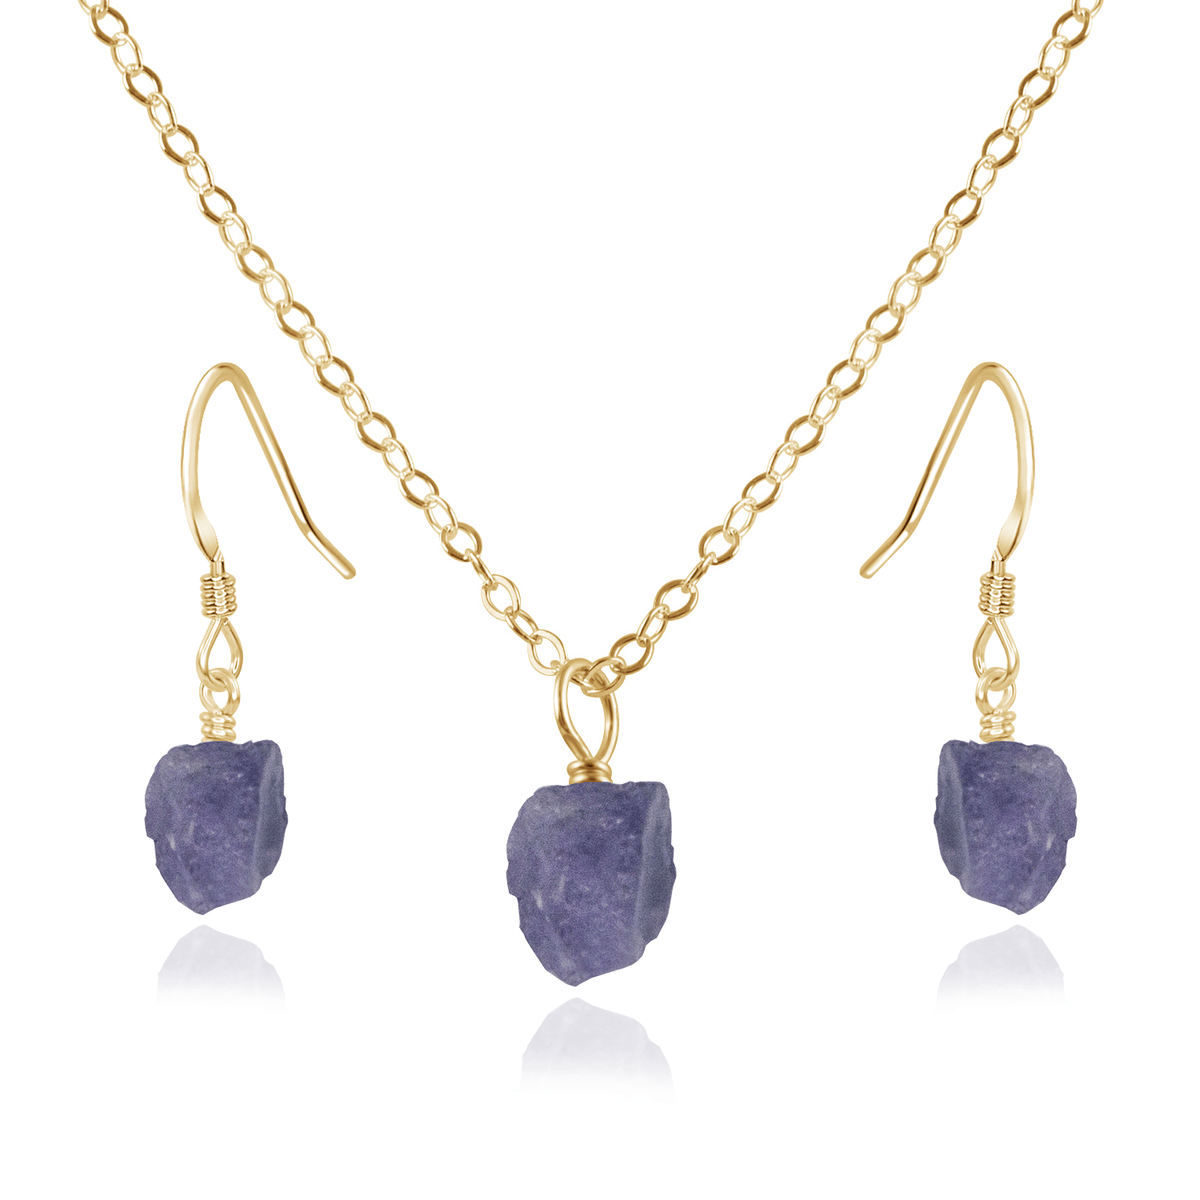 Raw Tanzanite Crystal Earrings & Necklace Set - Raw Tanzanite Crystal Earrings & Necklace Set - 14k Gold Fill / Cable - Luna Tide Handmade Crystal Jewellery